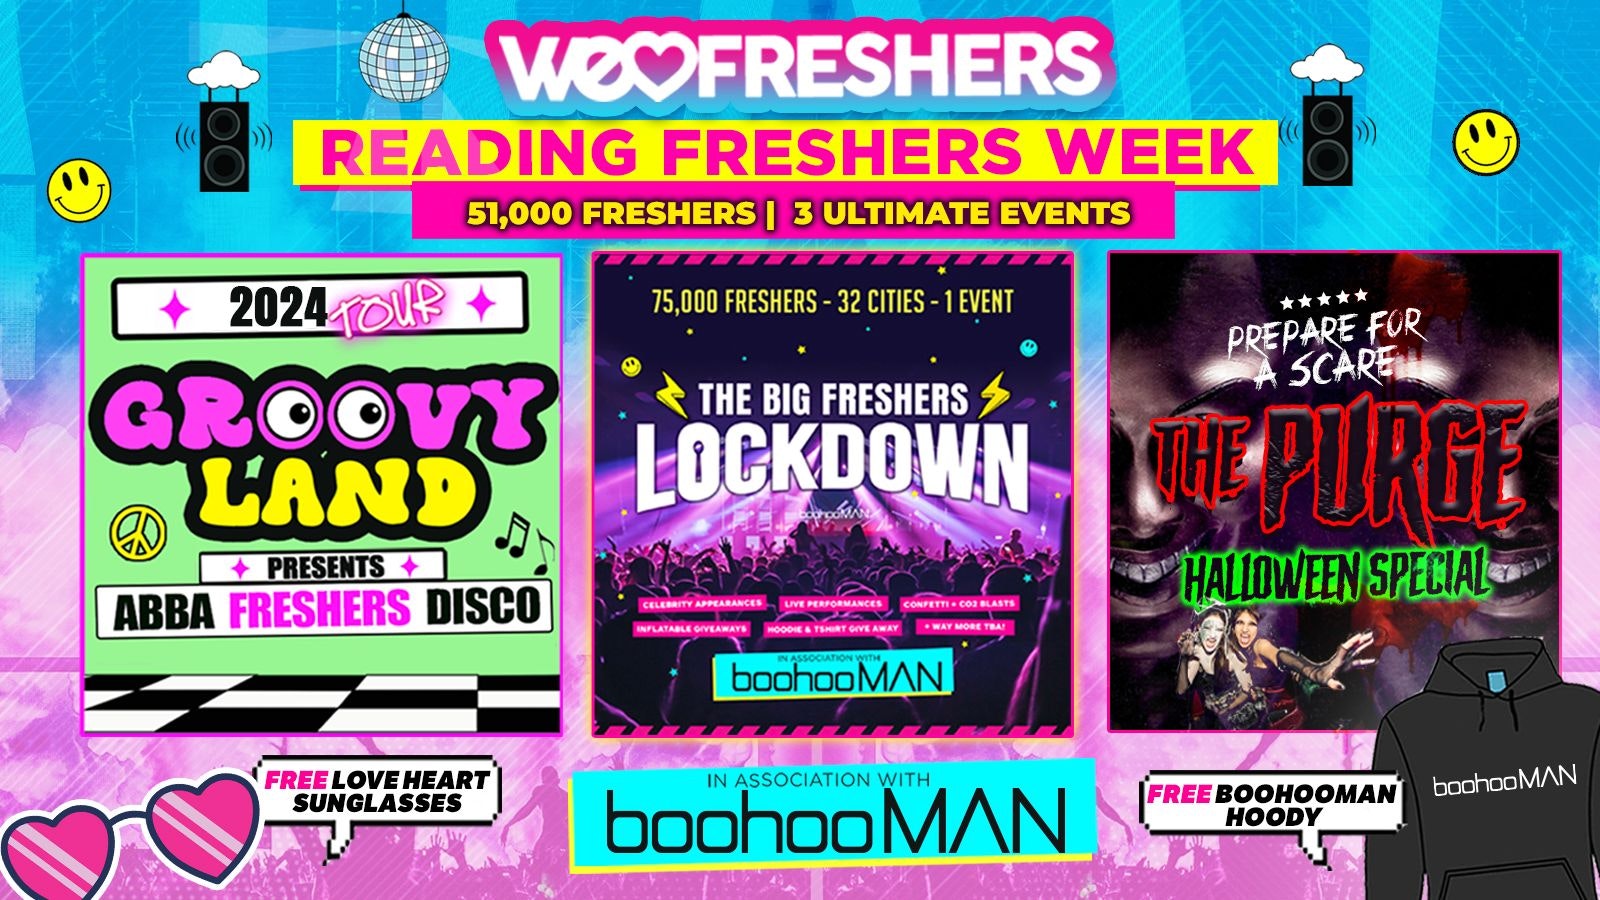 WE LOVE READING FRESHERS 2024 in association with boohooMAN – 3 EVENTS❗